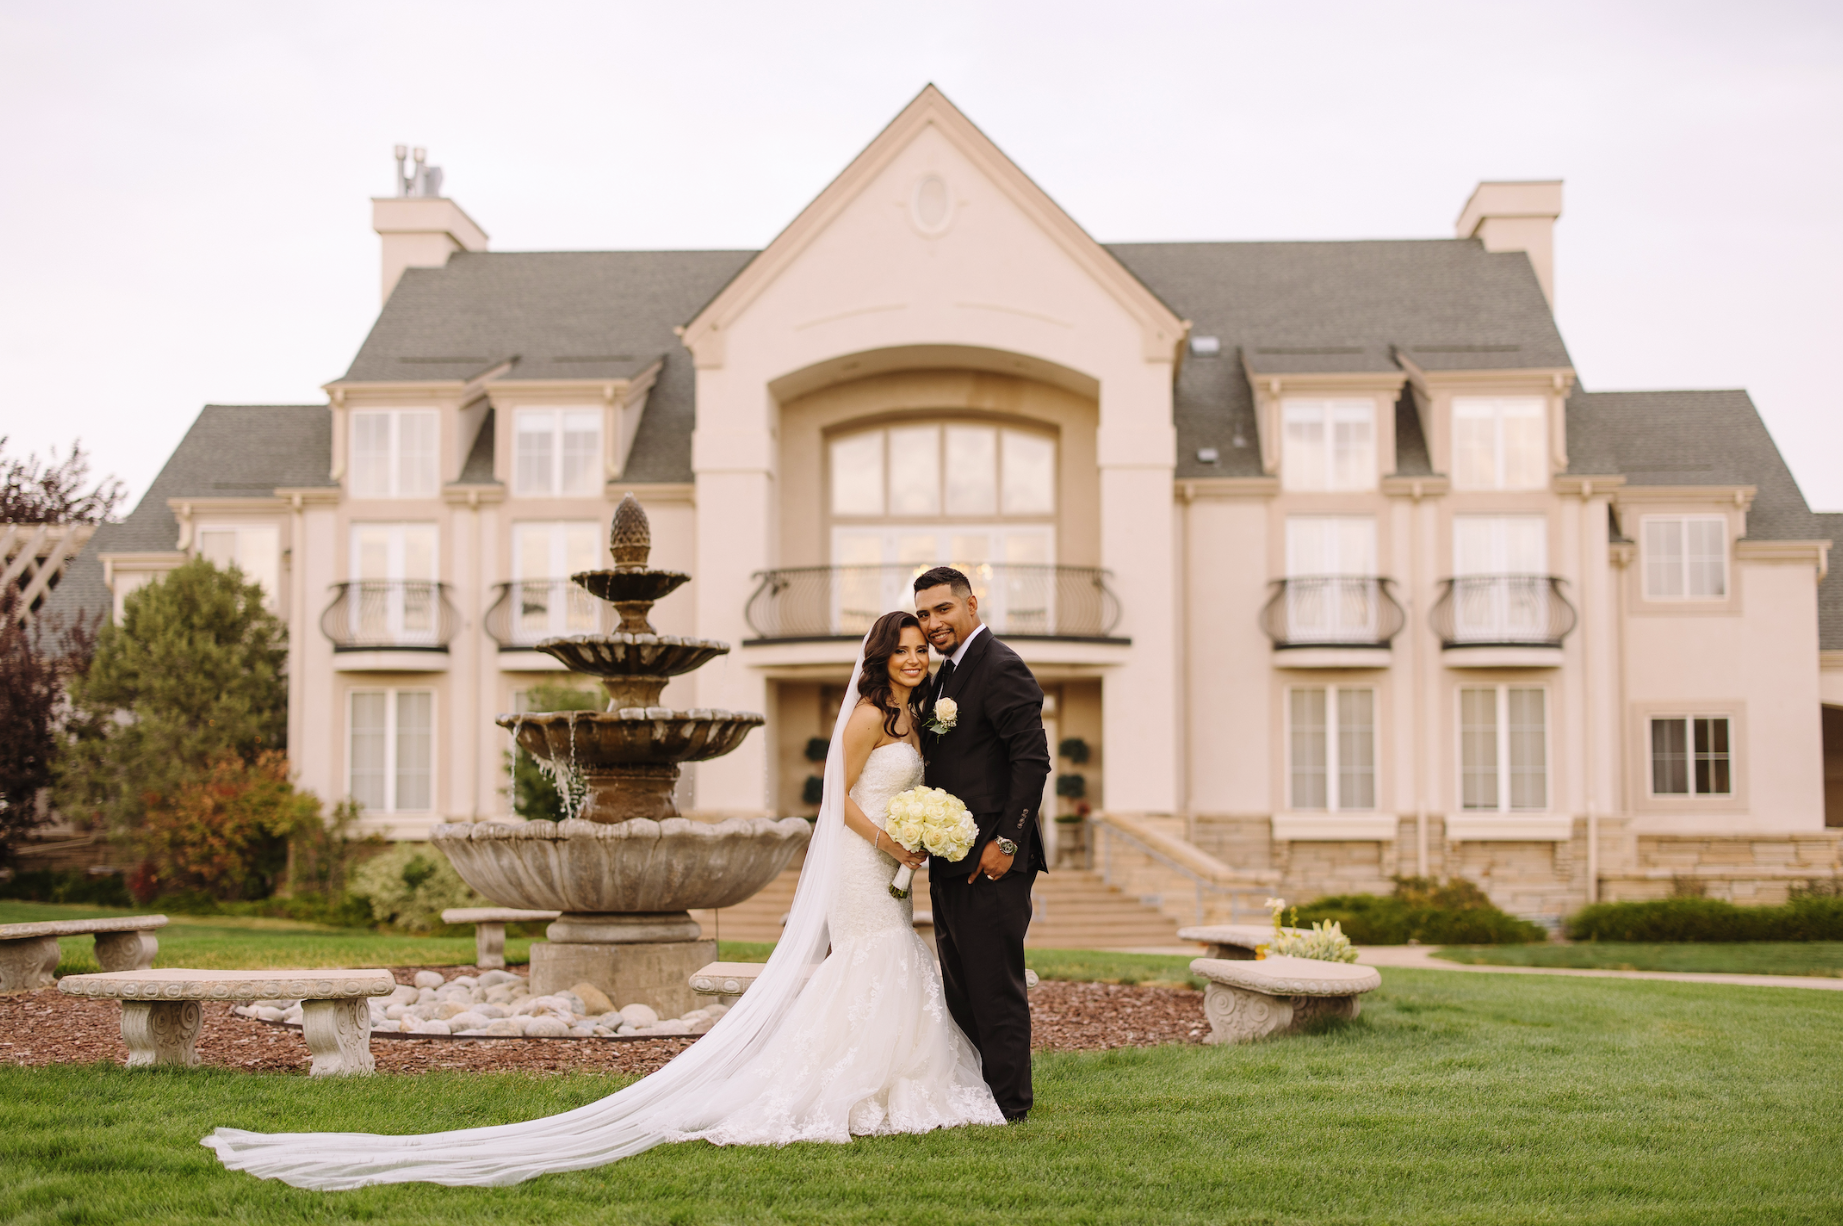 Chateaux at Fox Meadows Denver Wedding Venue Colorado Wedding Photographer Elopement Mountains Gorgeous Best Latina Mexican Weddings Broomfield CO Vintage Glam Boho Boulder Fort Collins LGBTQ